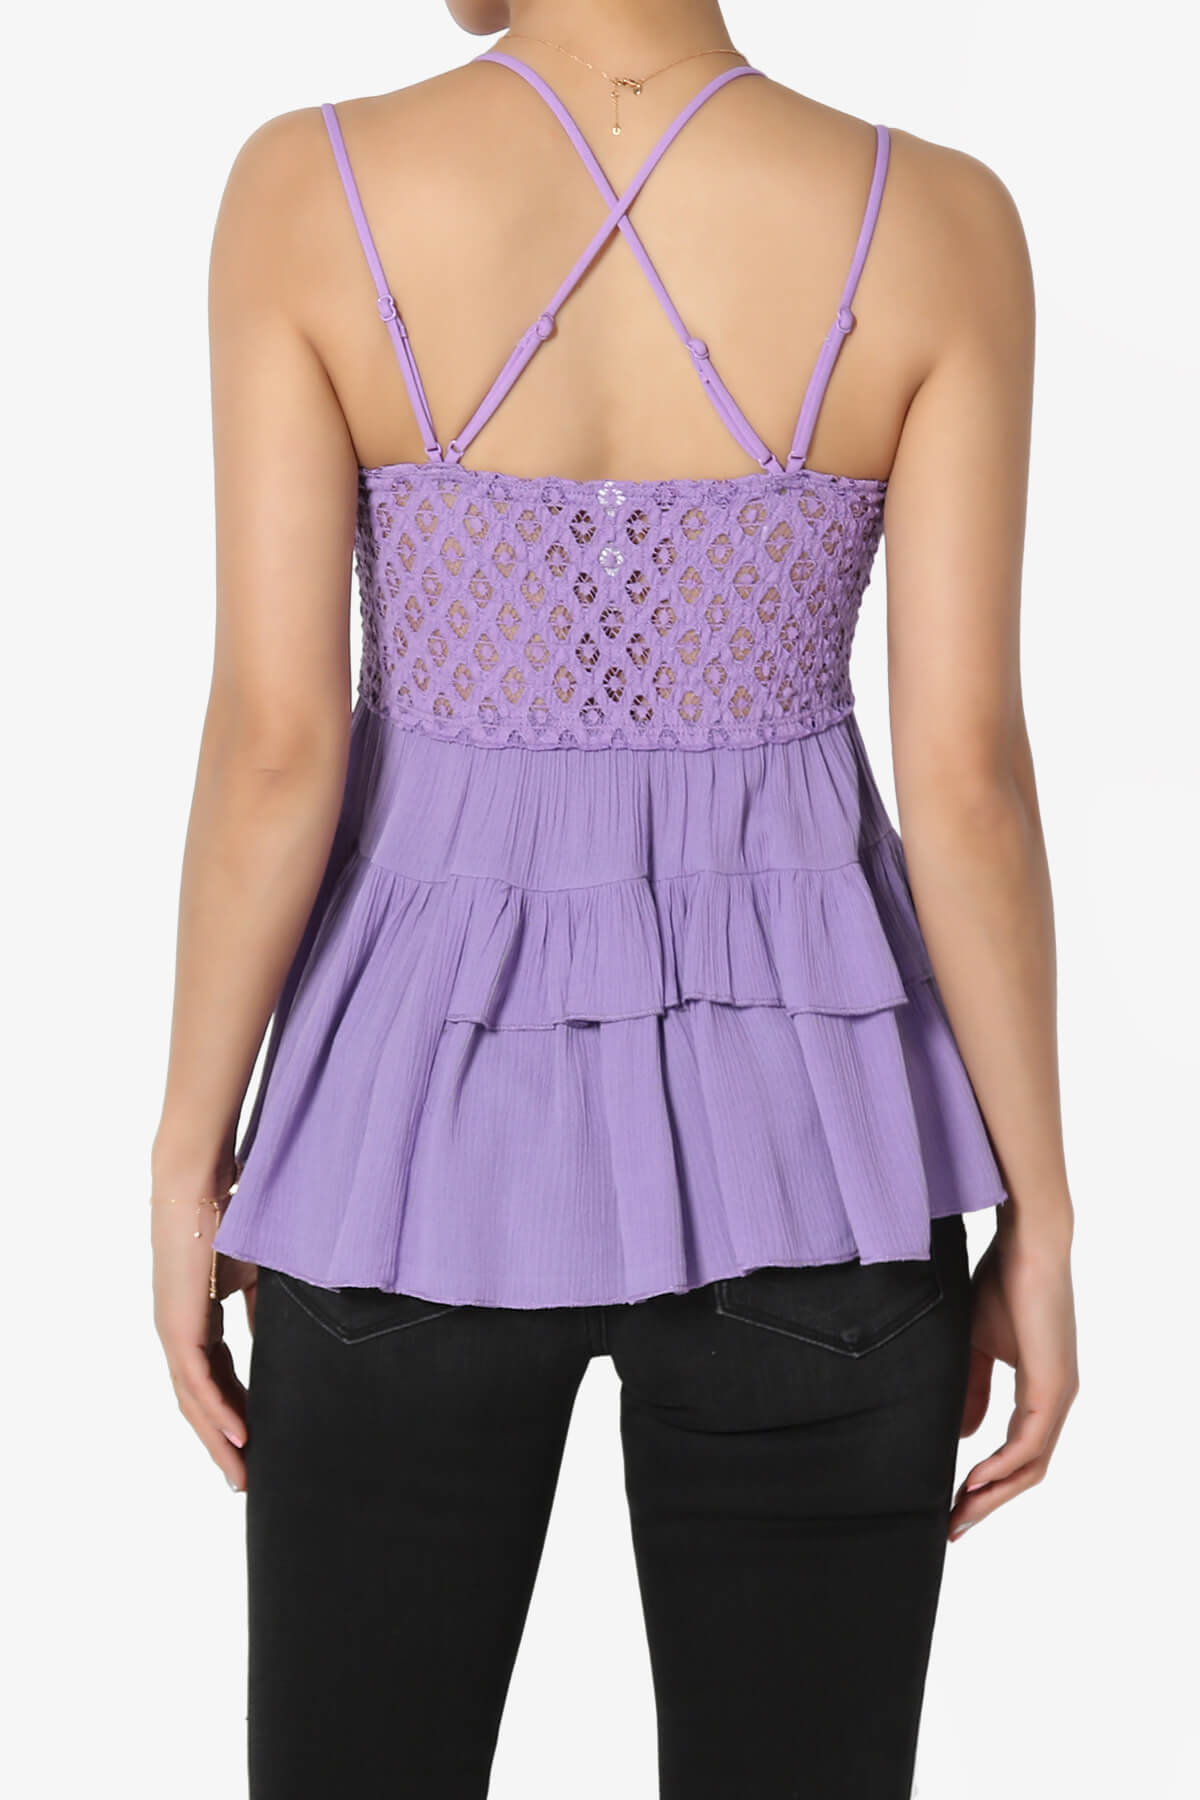 Load image into Gallery viewer, Lynden Crochet Lace Ruffle Peplum Cami LAVENDER_2
